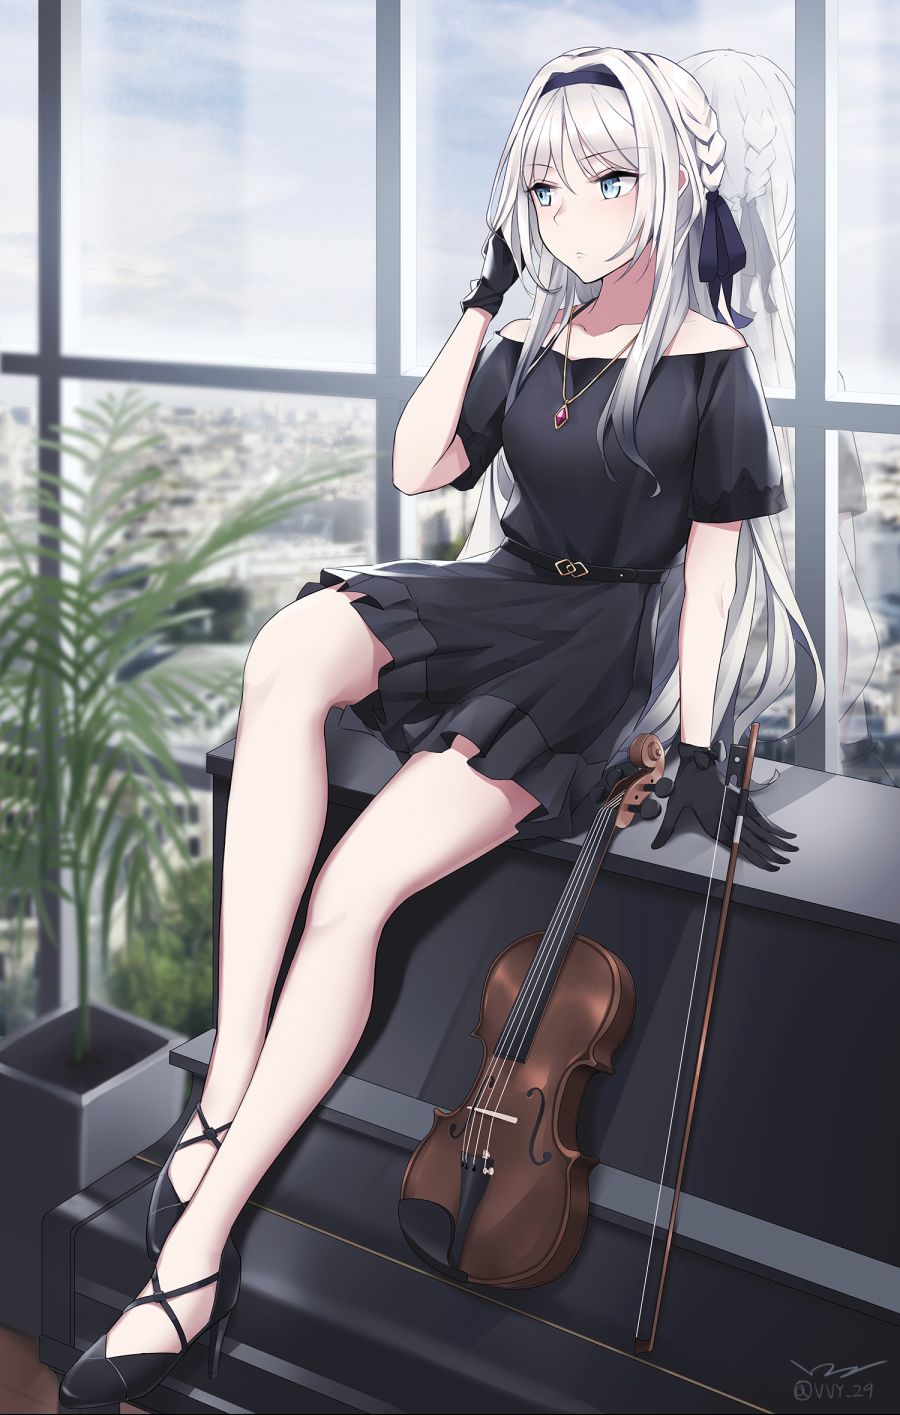 __an_94_girls_frontline_drawn_by_vvy__3987204e510be2148dc9d0588559e97c.png